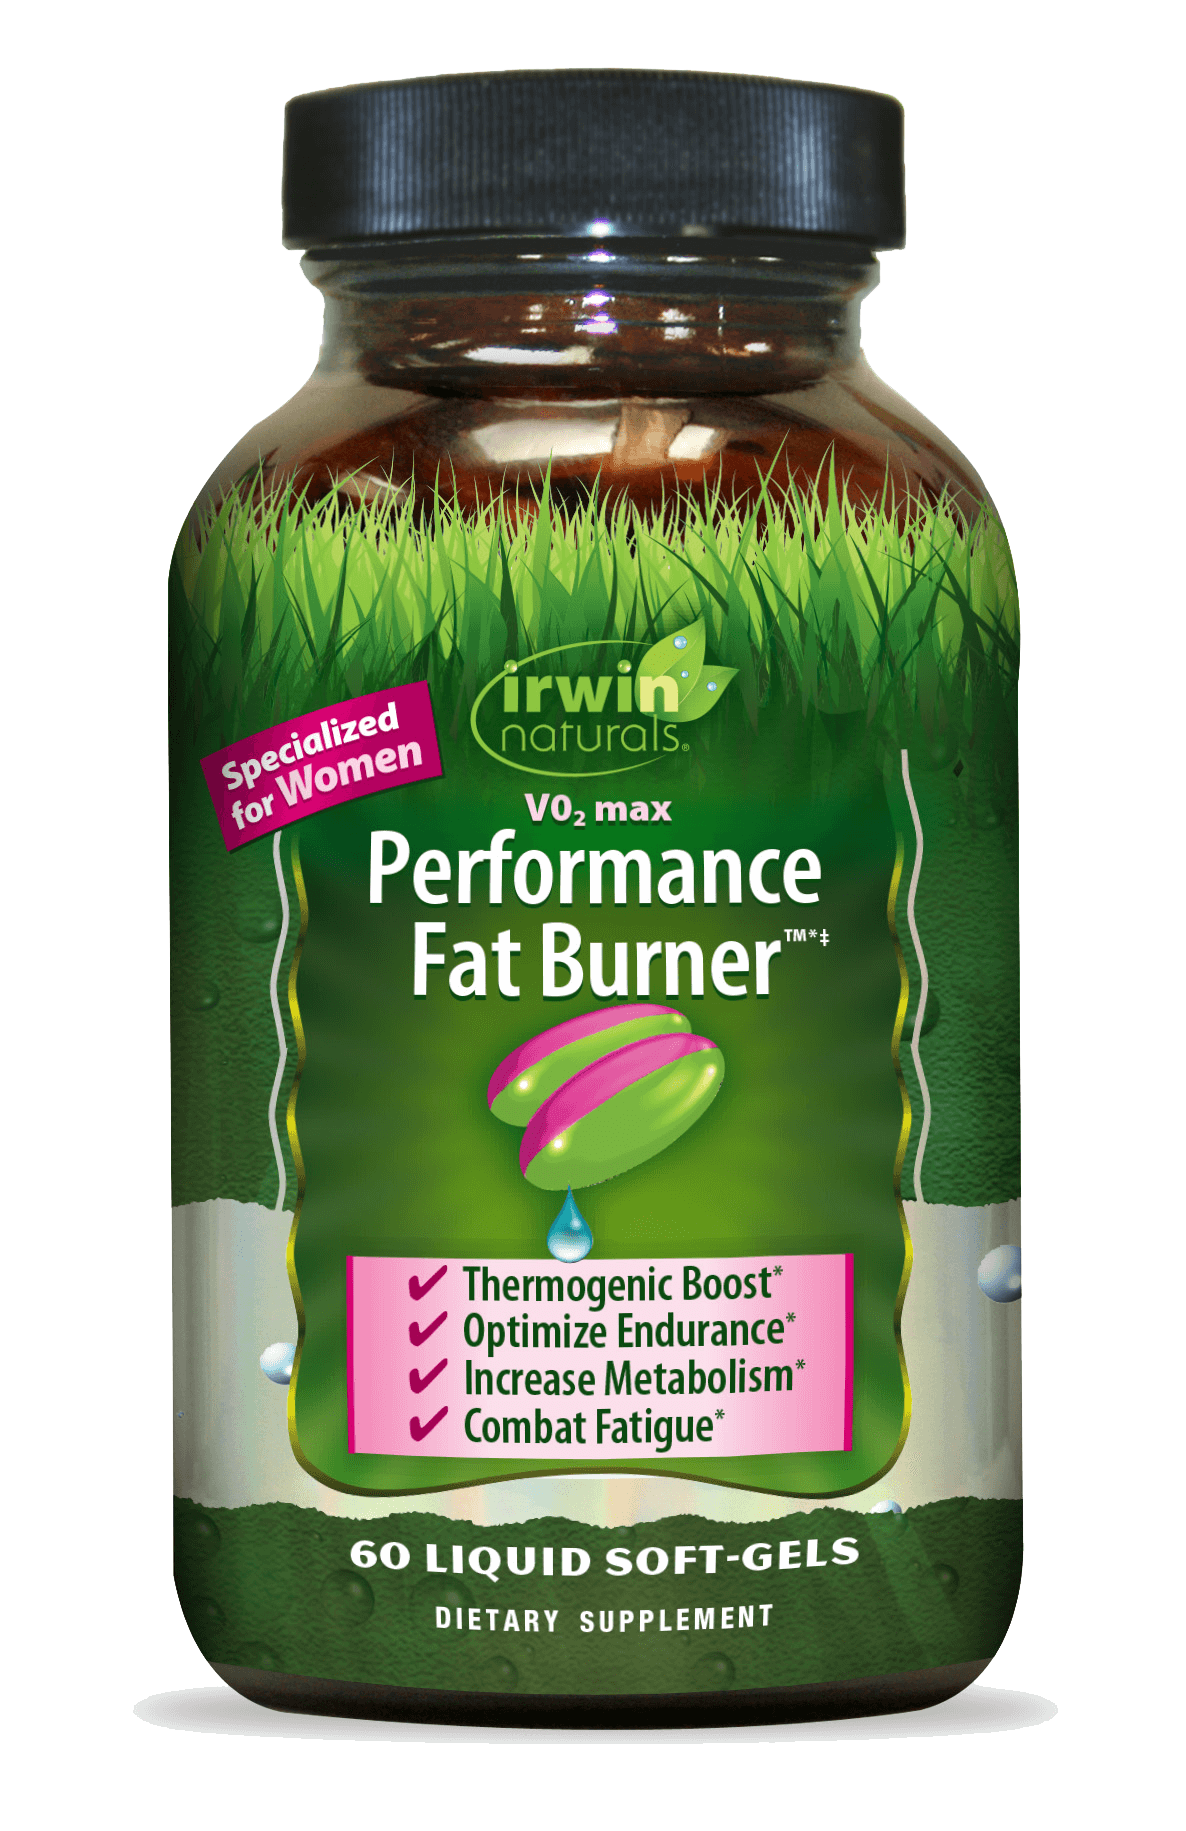 V02 Max Performance Fat Burner Specialized For Women by Irwin Naturals